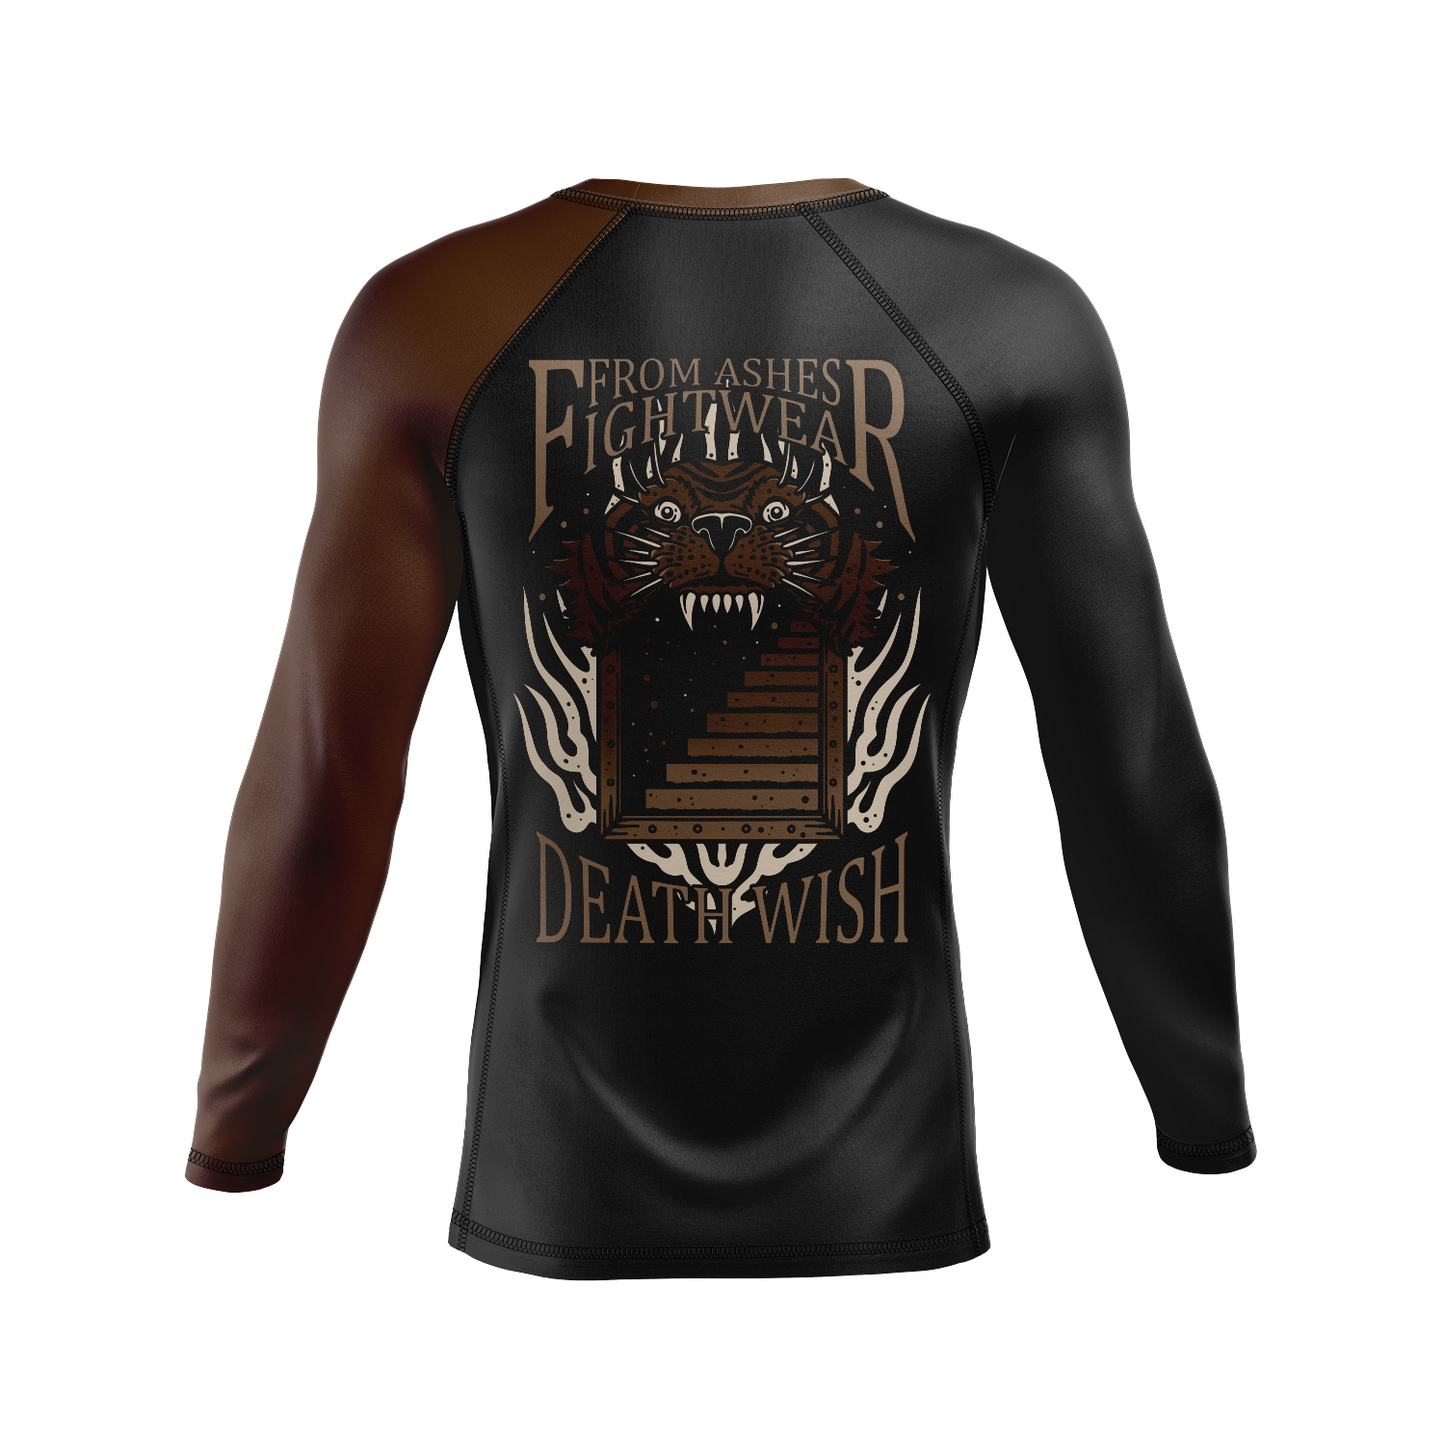 From Ashes Fightwear men's rash guard Death Wish Ranked, black and brown